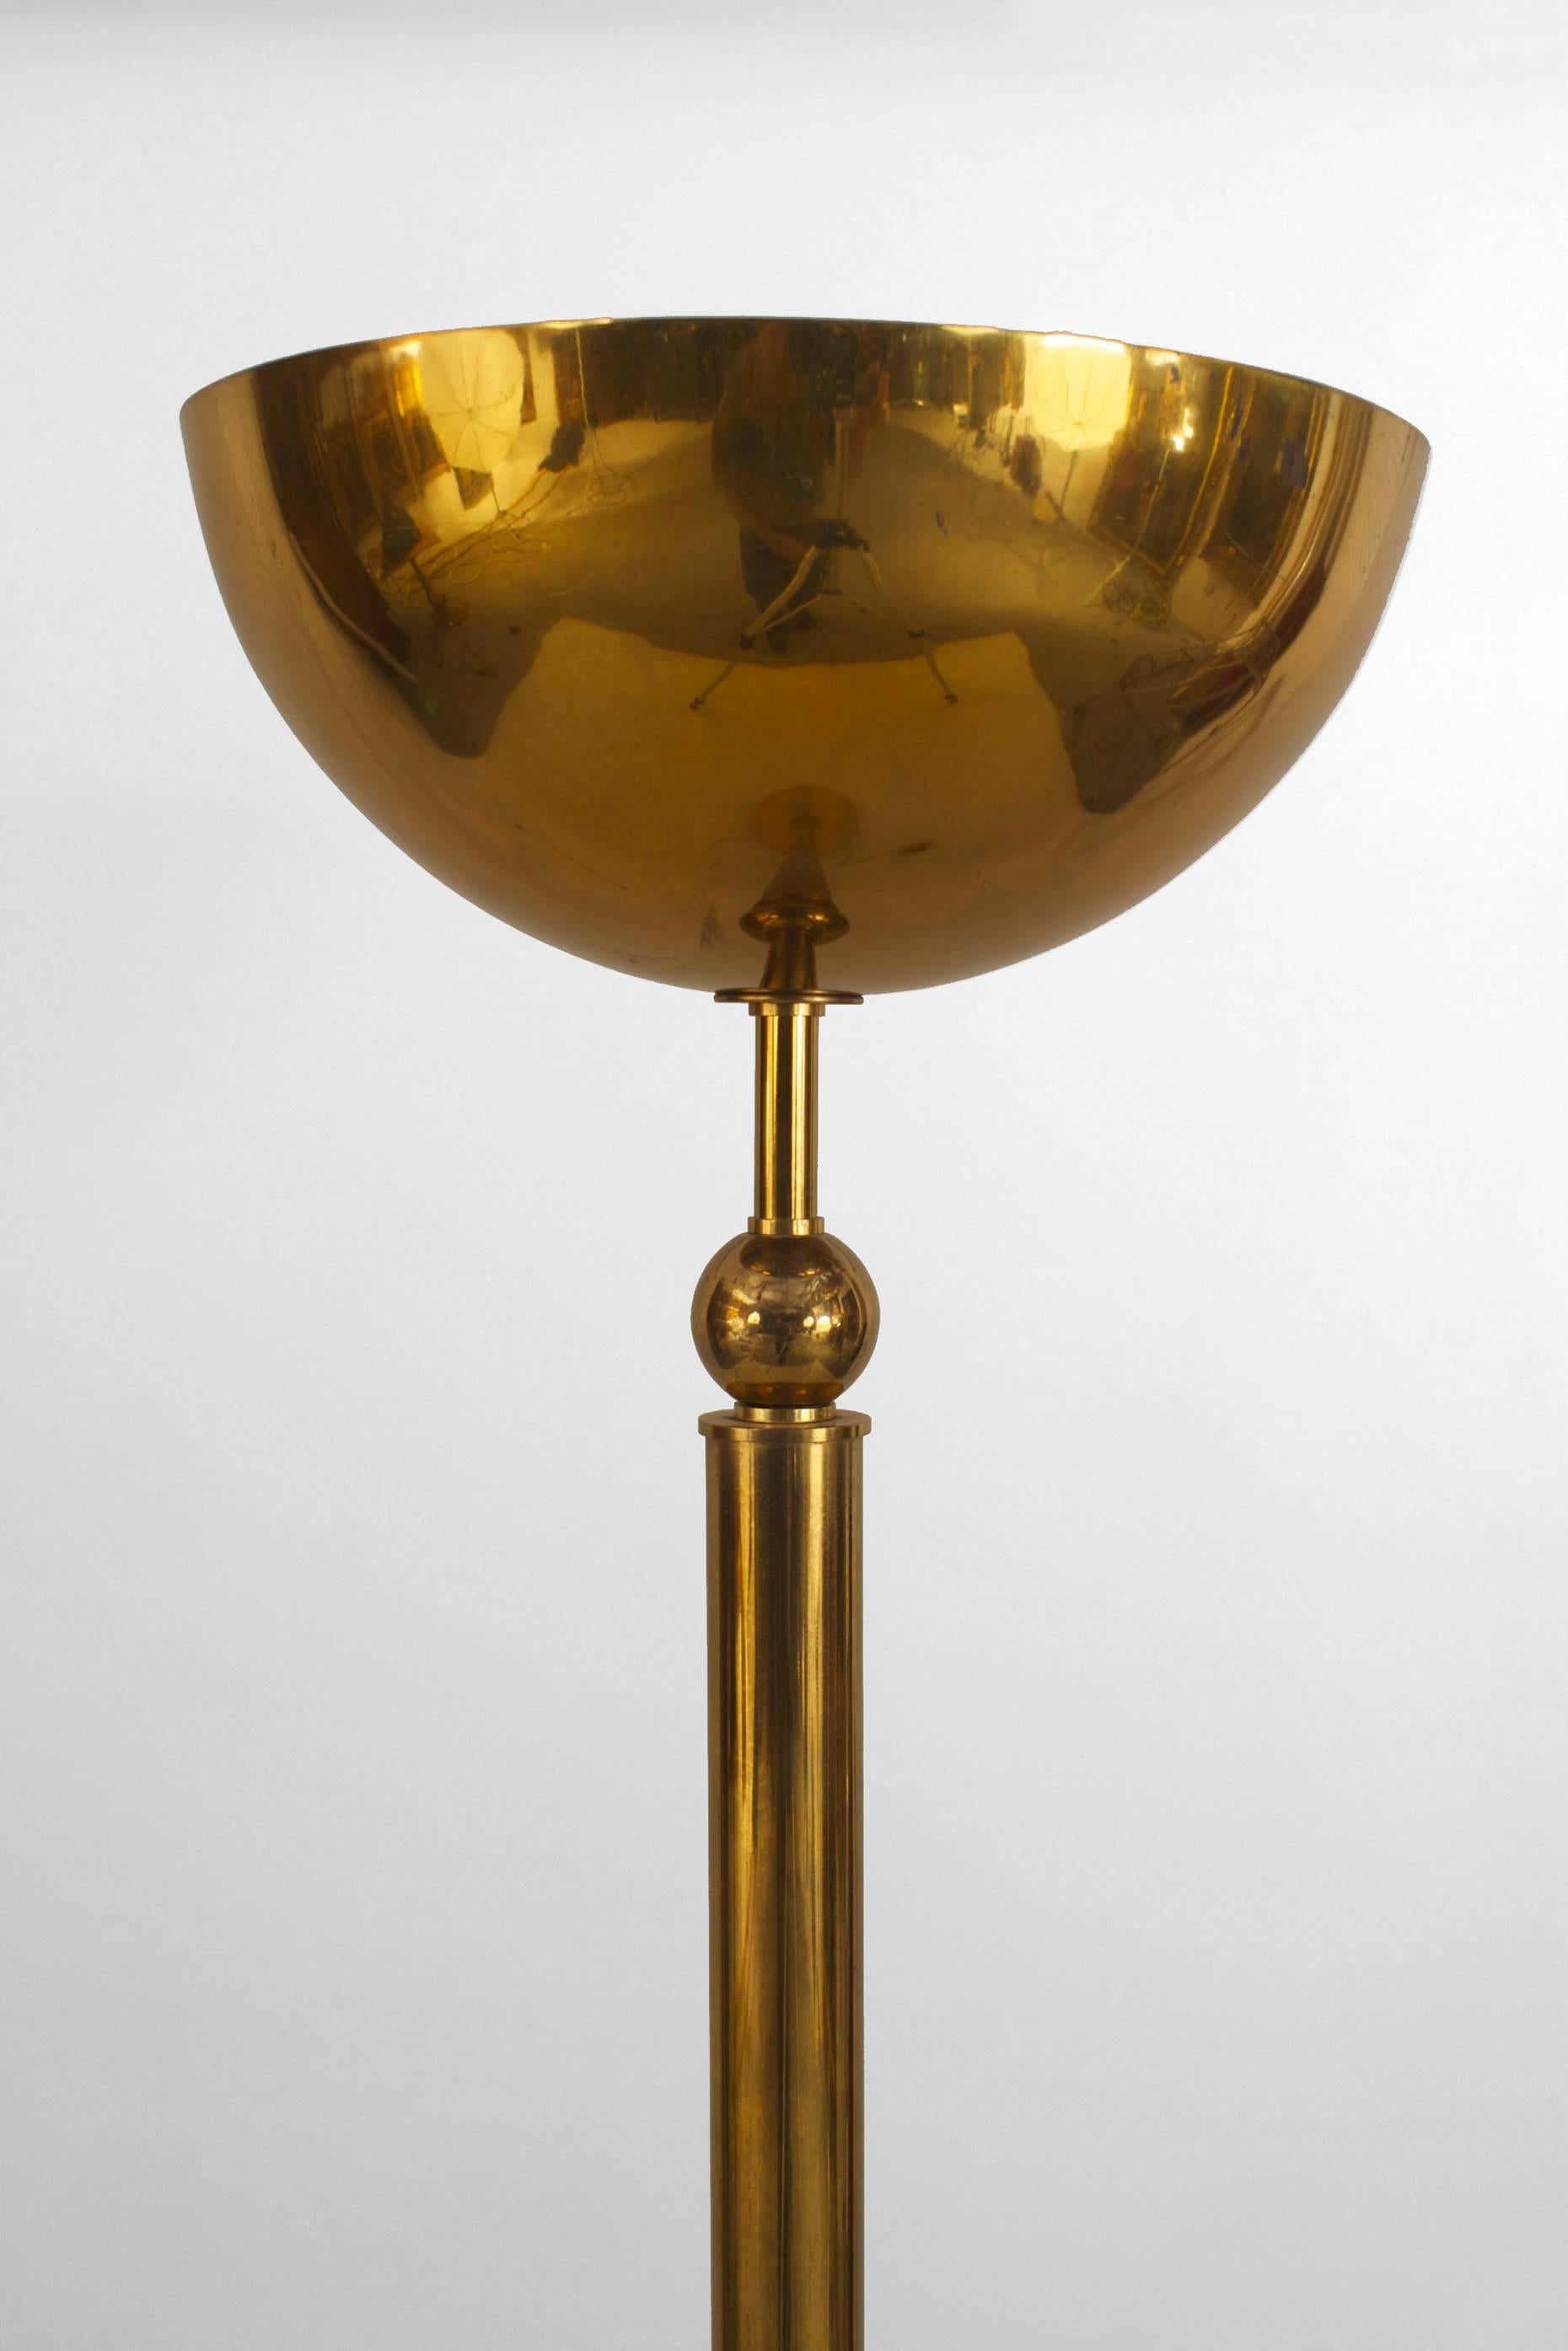 French 1940s brass floor lamp with a cylindrical shaft supporting a large dome and resting on a round base.
